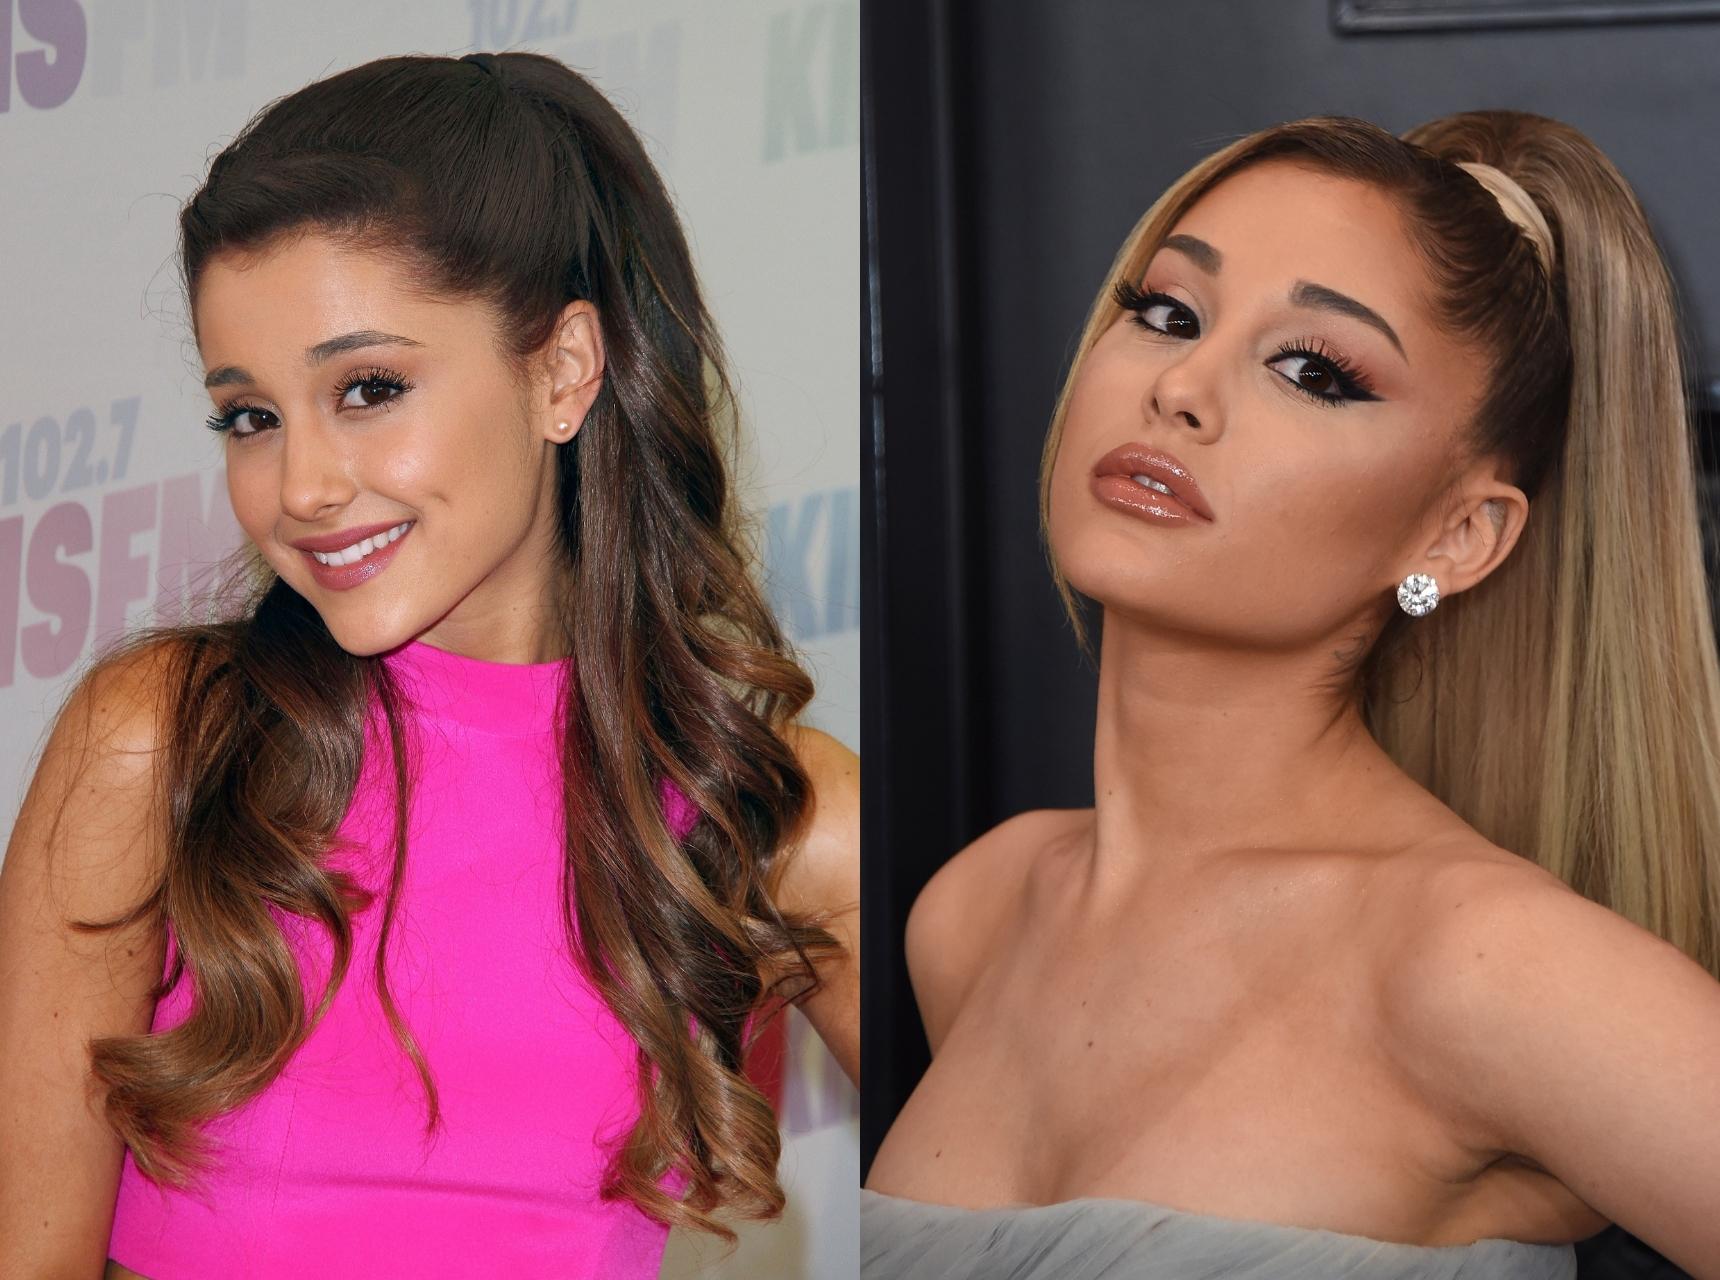 Ariana Grande in 2013 and 2022